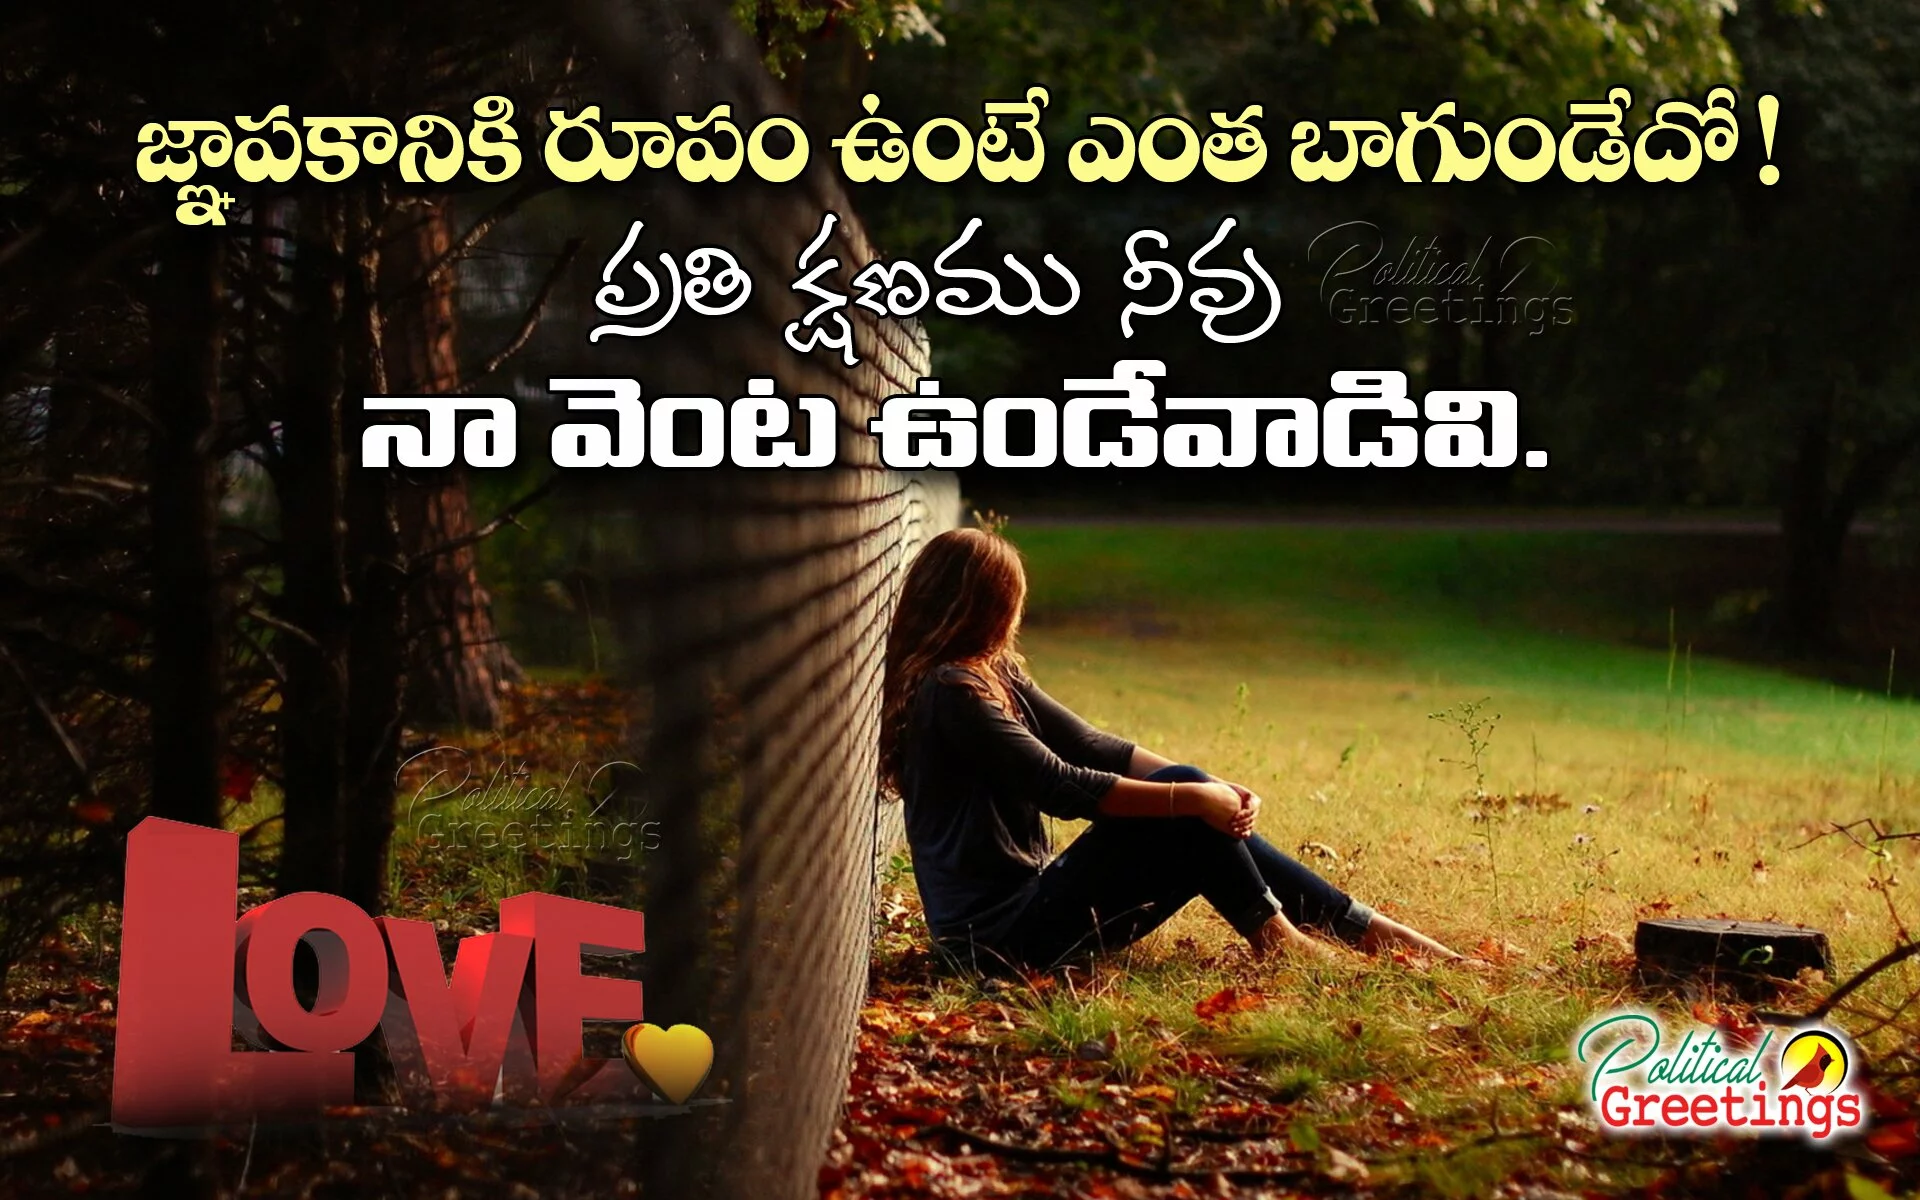 Telugu sad love alone Quotes with images n HD wallpapaers